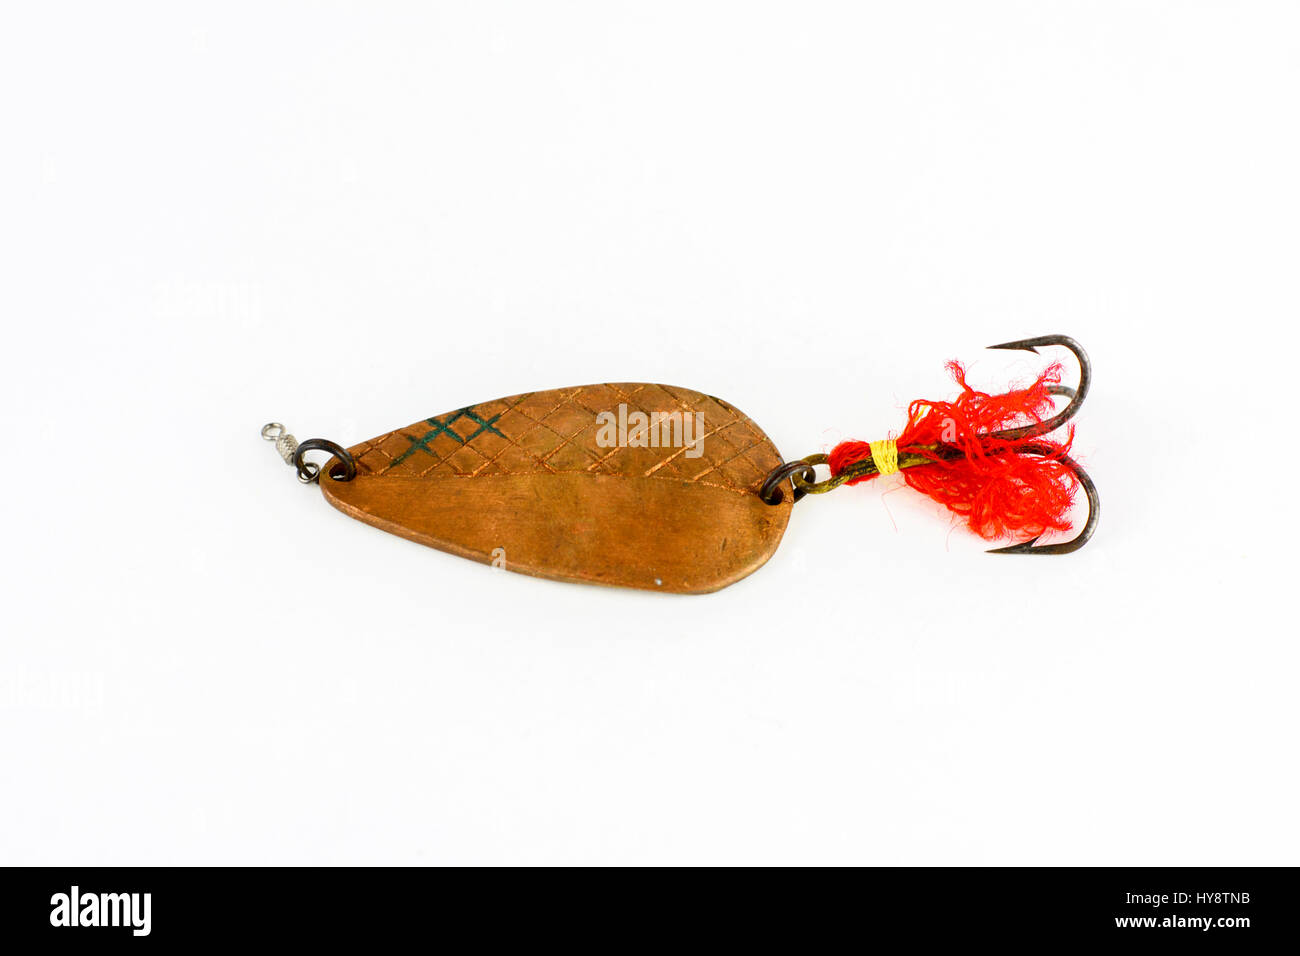 Fishing small fish on hook Cut Out Stock Images & Pictures - Page 2 - Alamy